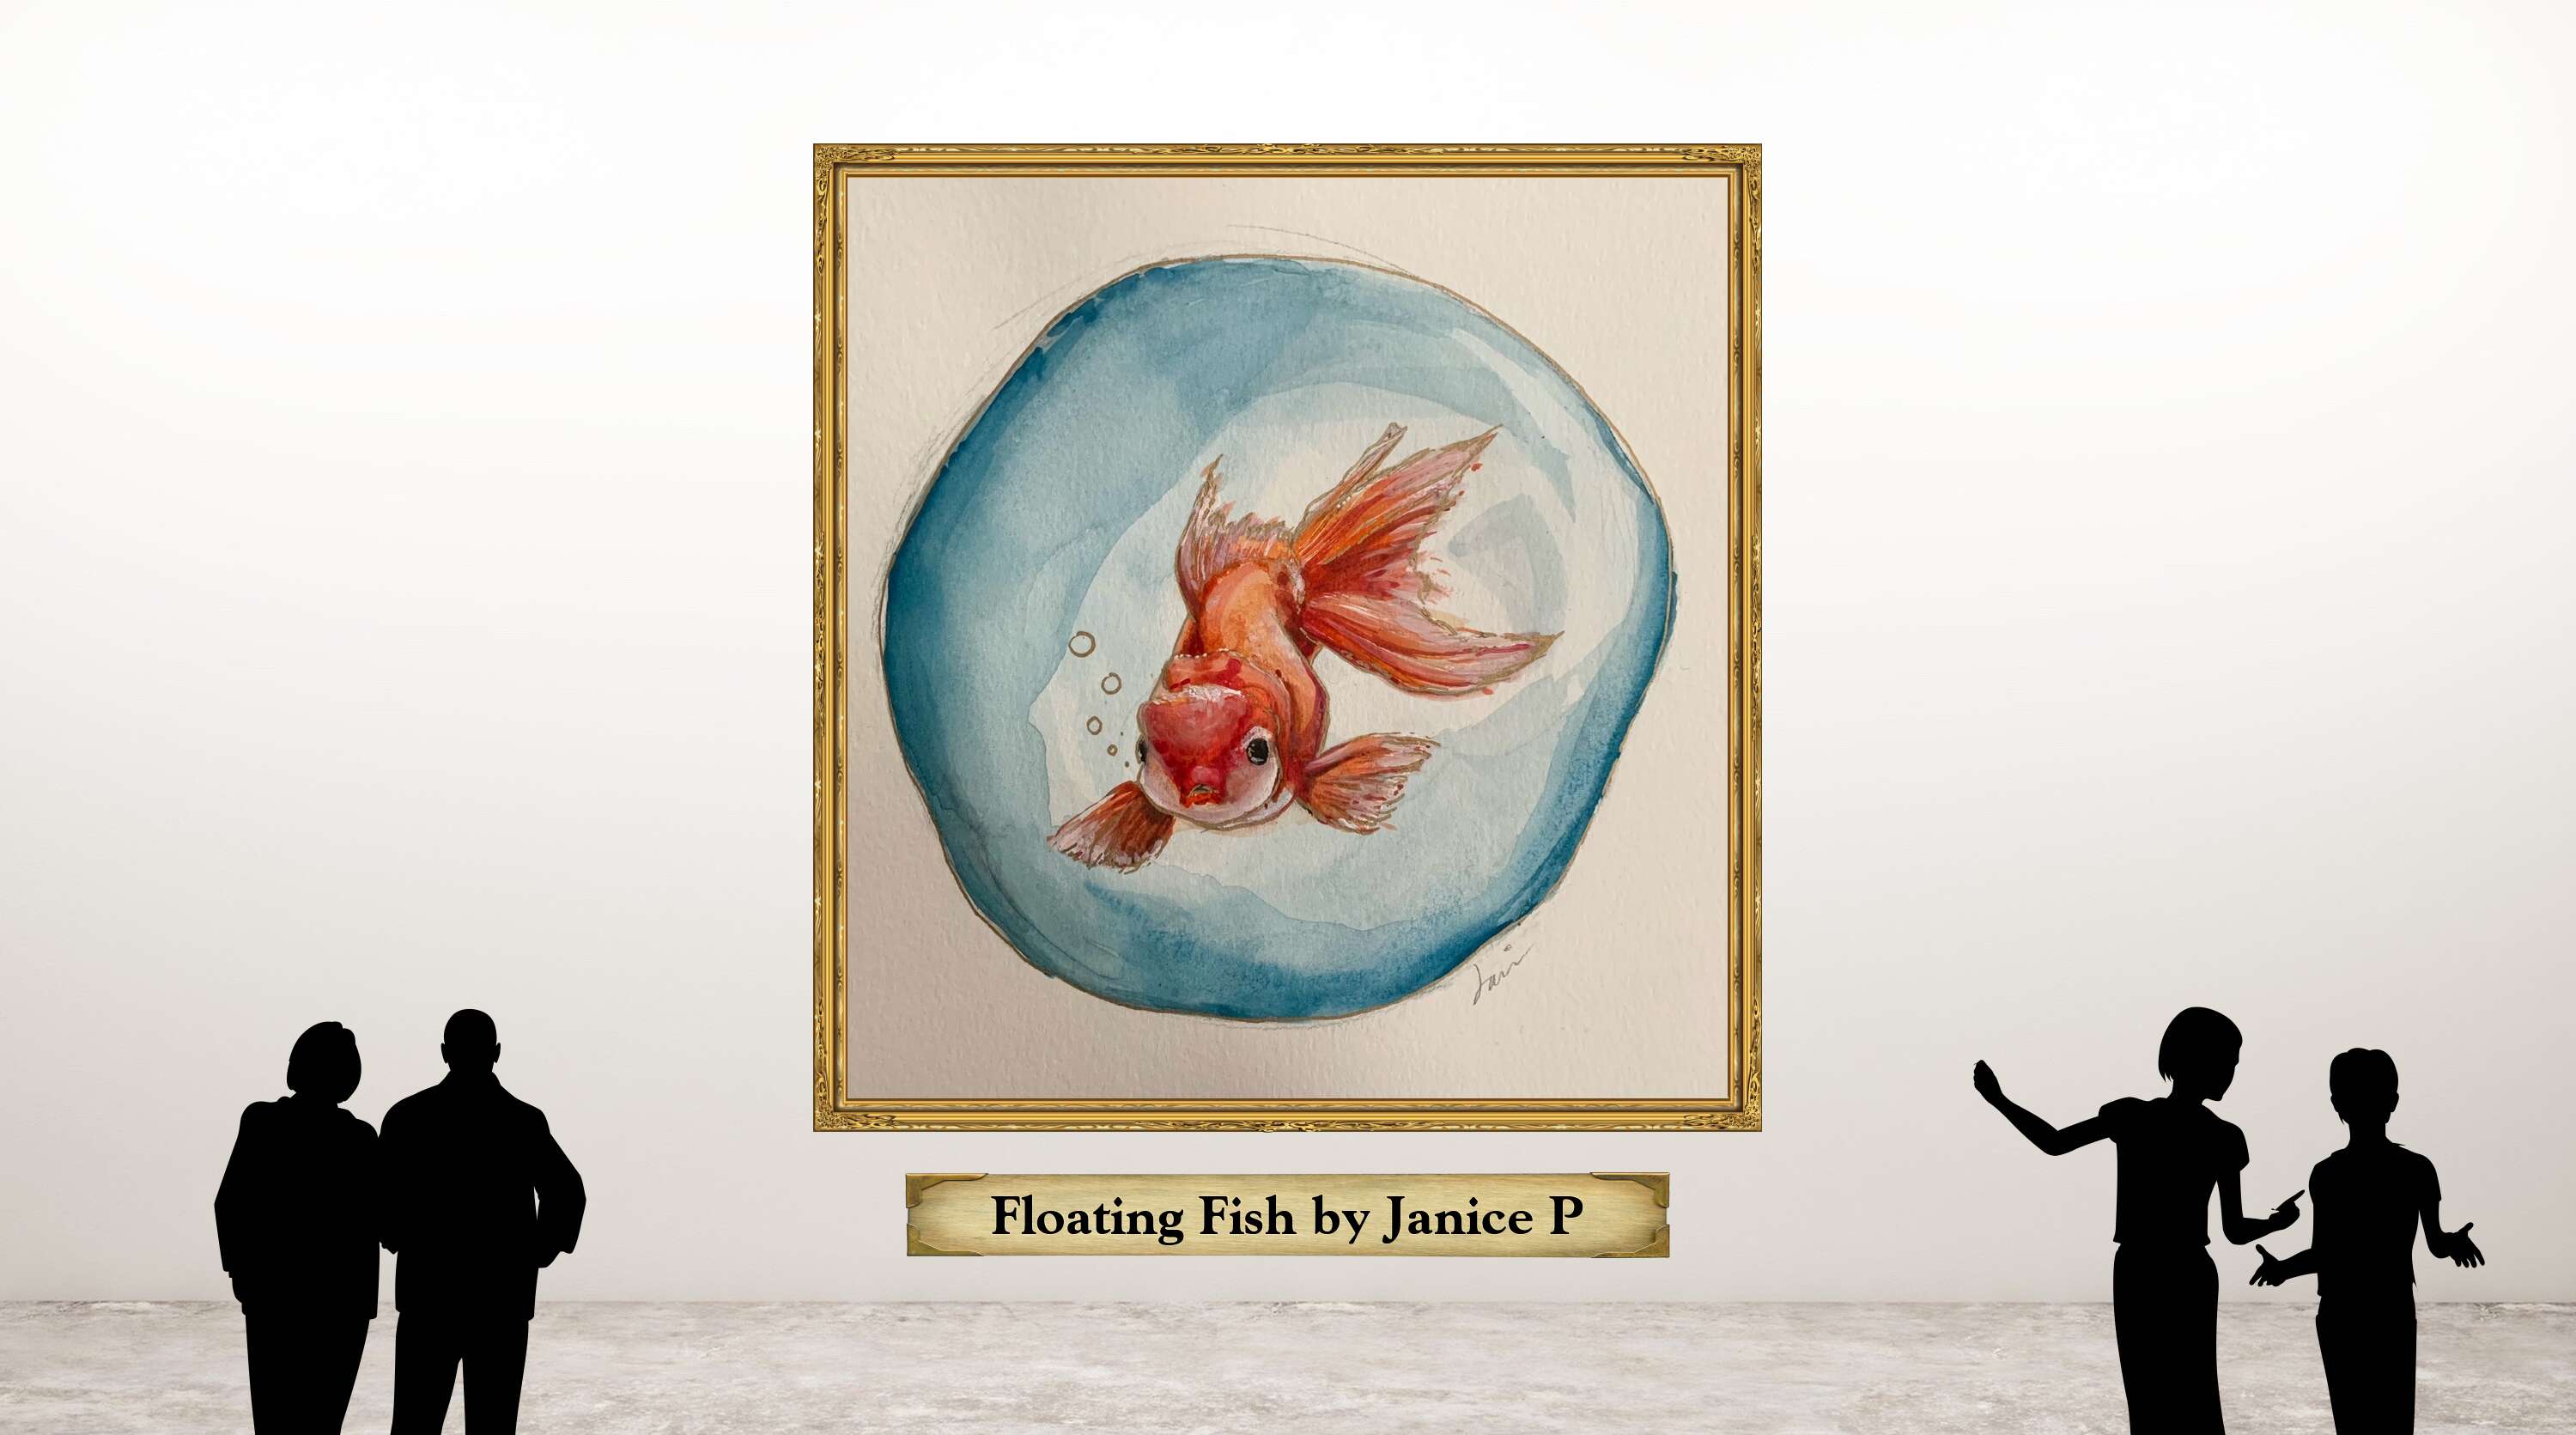 Floating Fish by Janice P